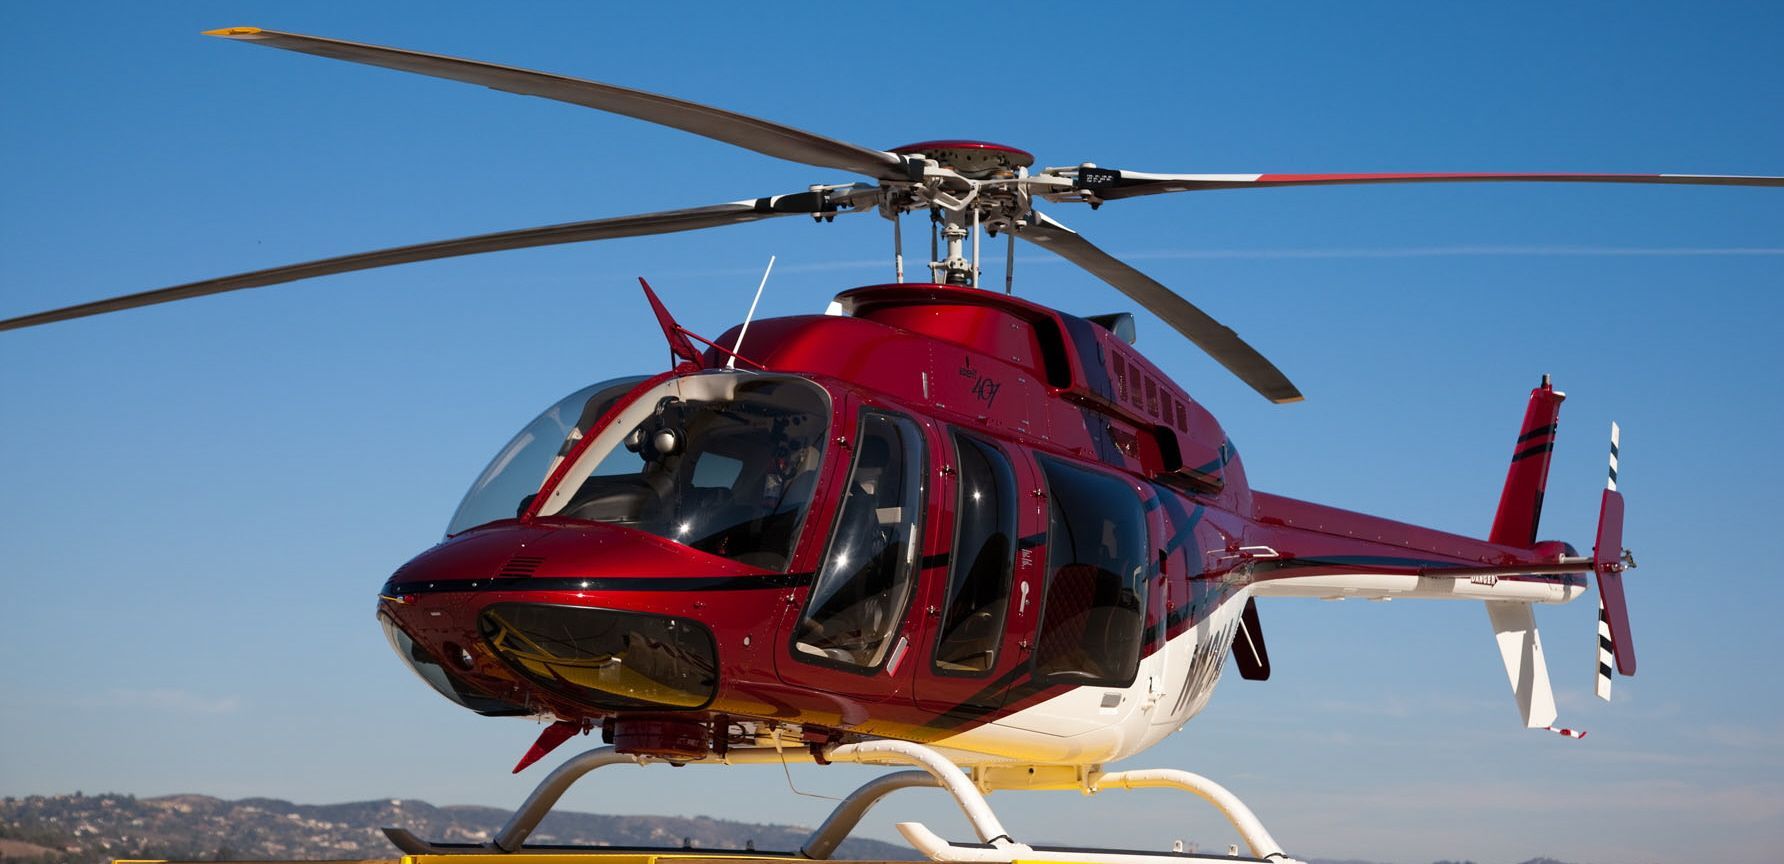 Bell 407 Helicopter. Helicopter, Private aircraft, Aviation